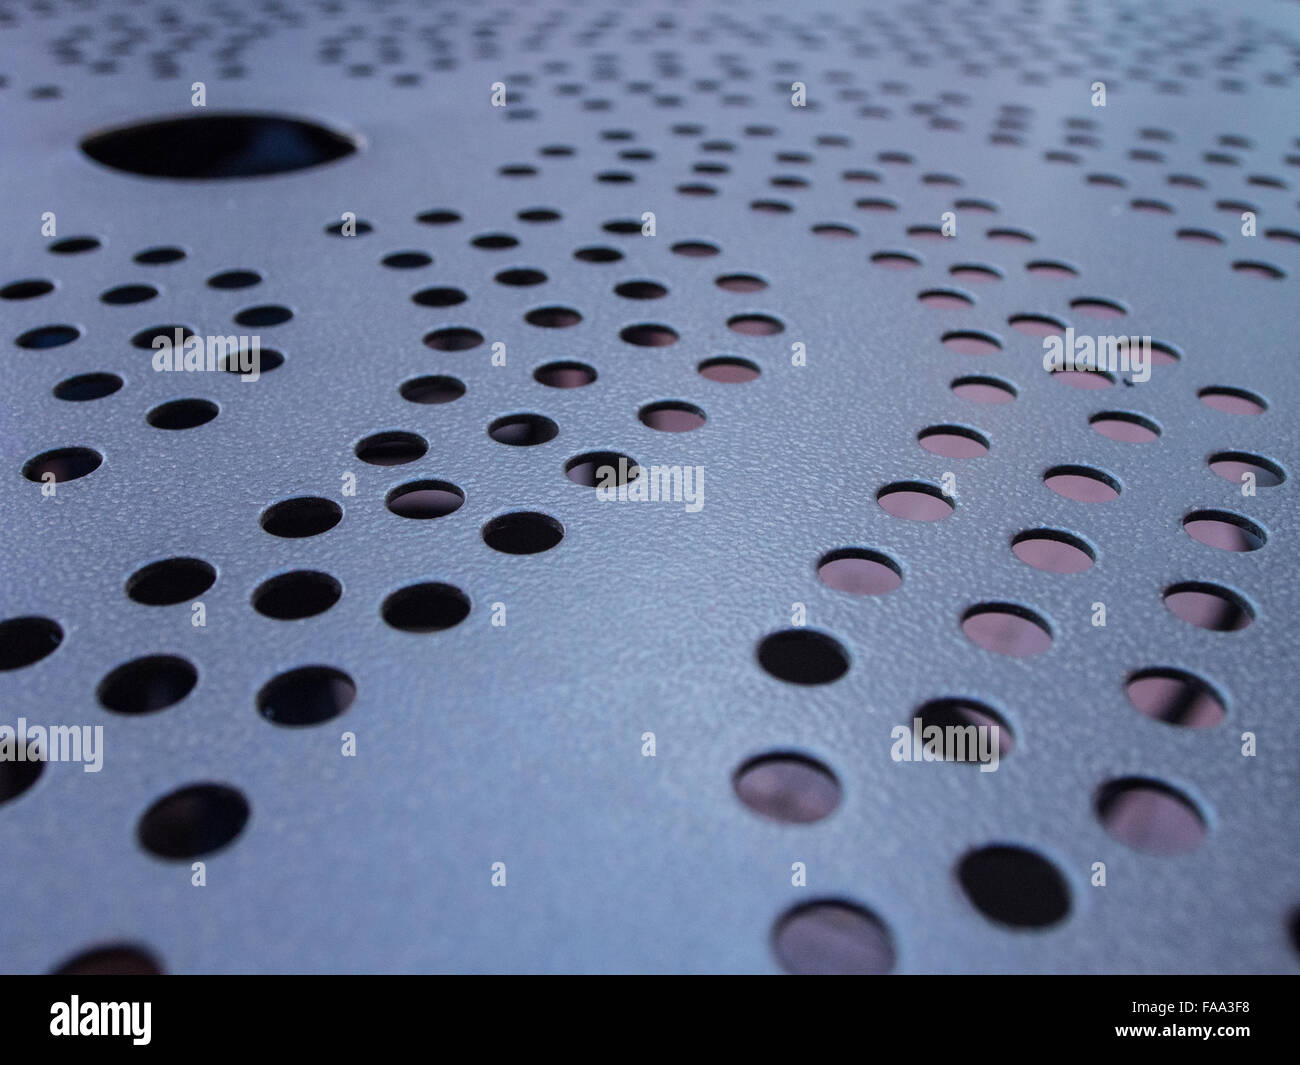 Metal table with holes and swirls design Stock Photo